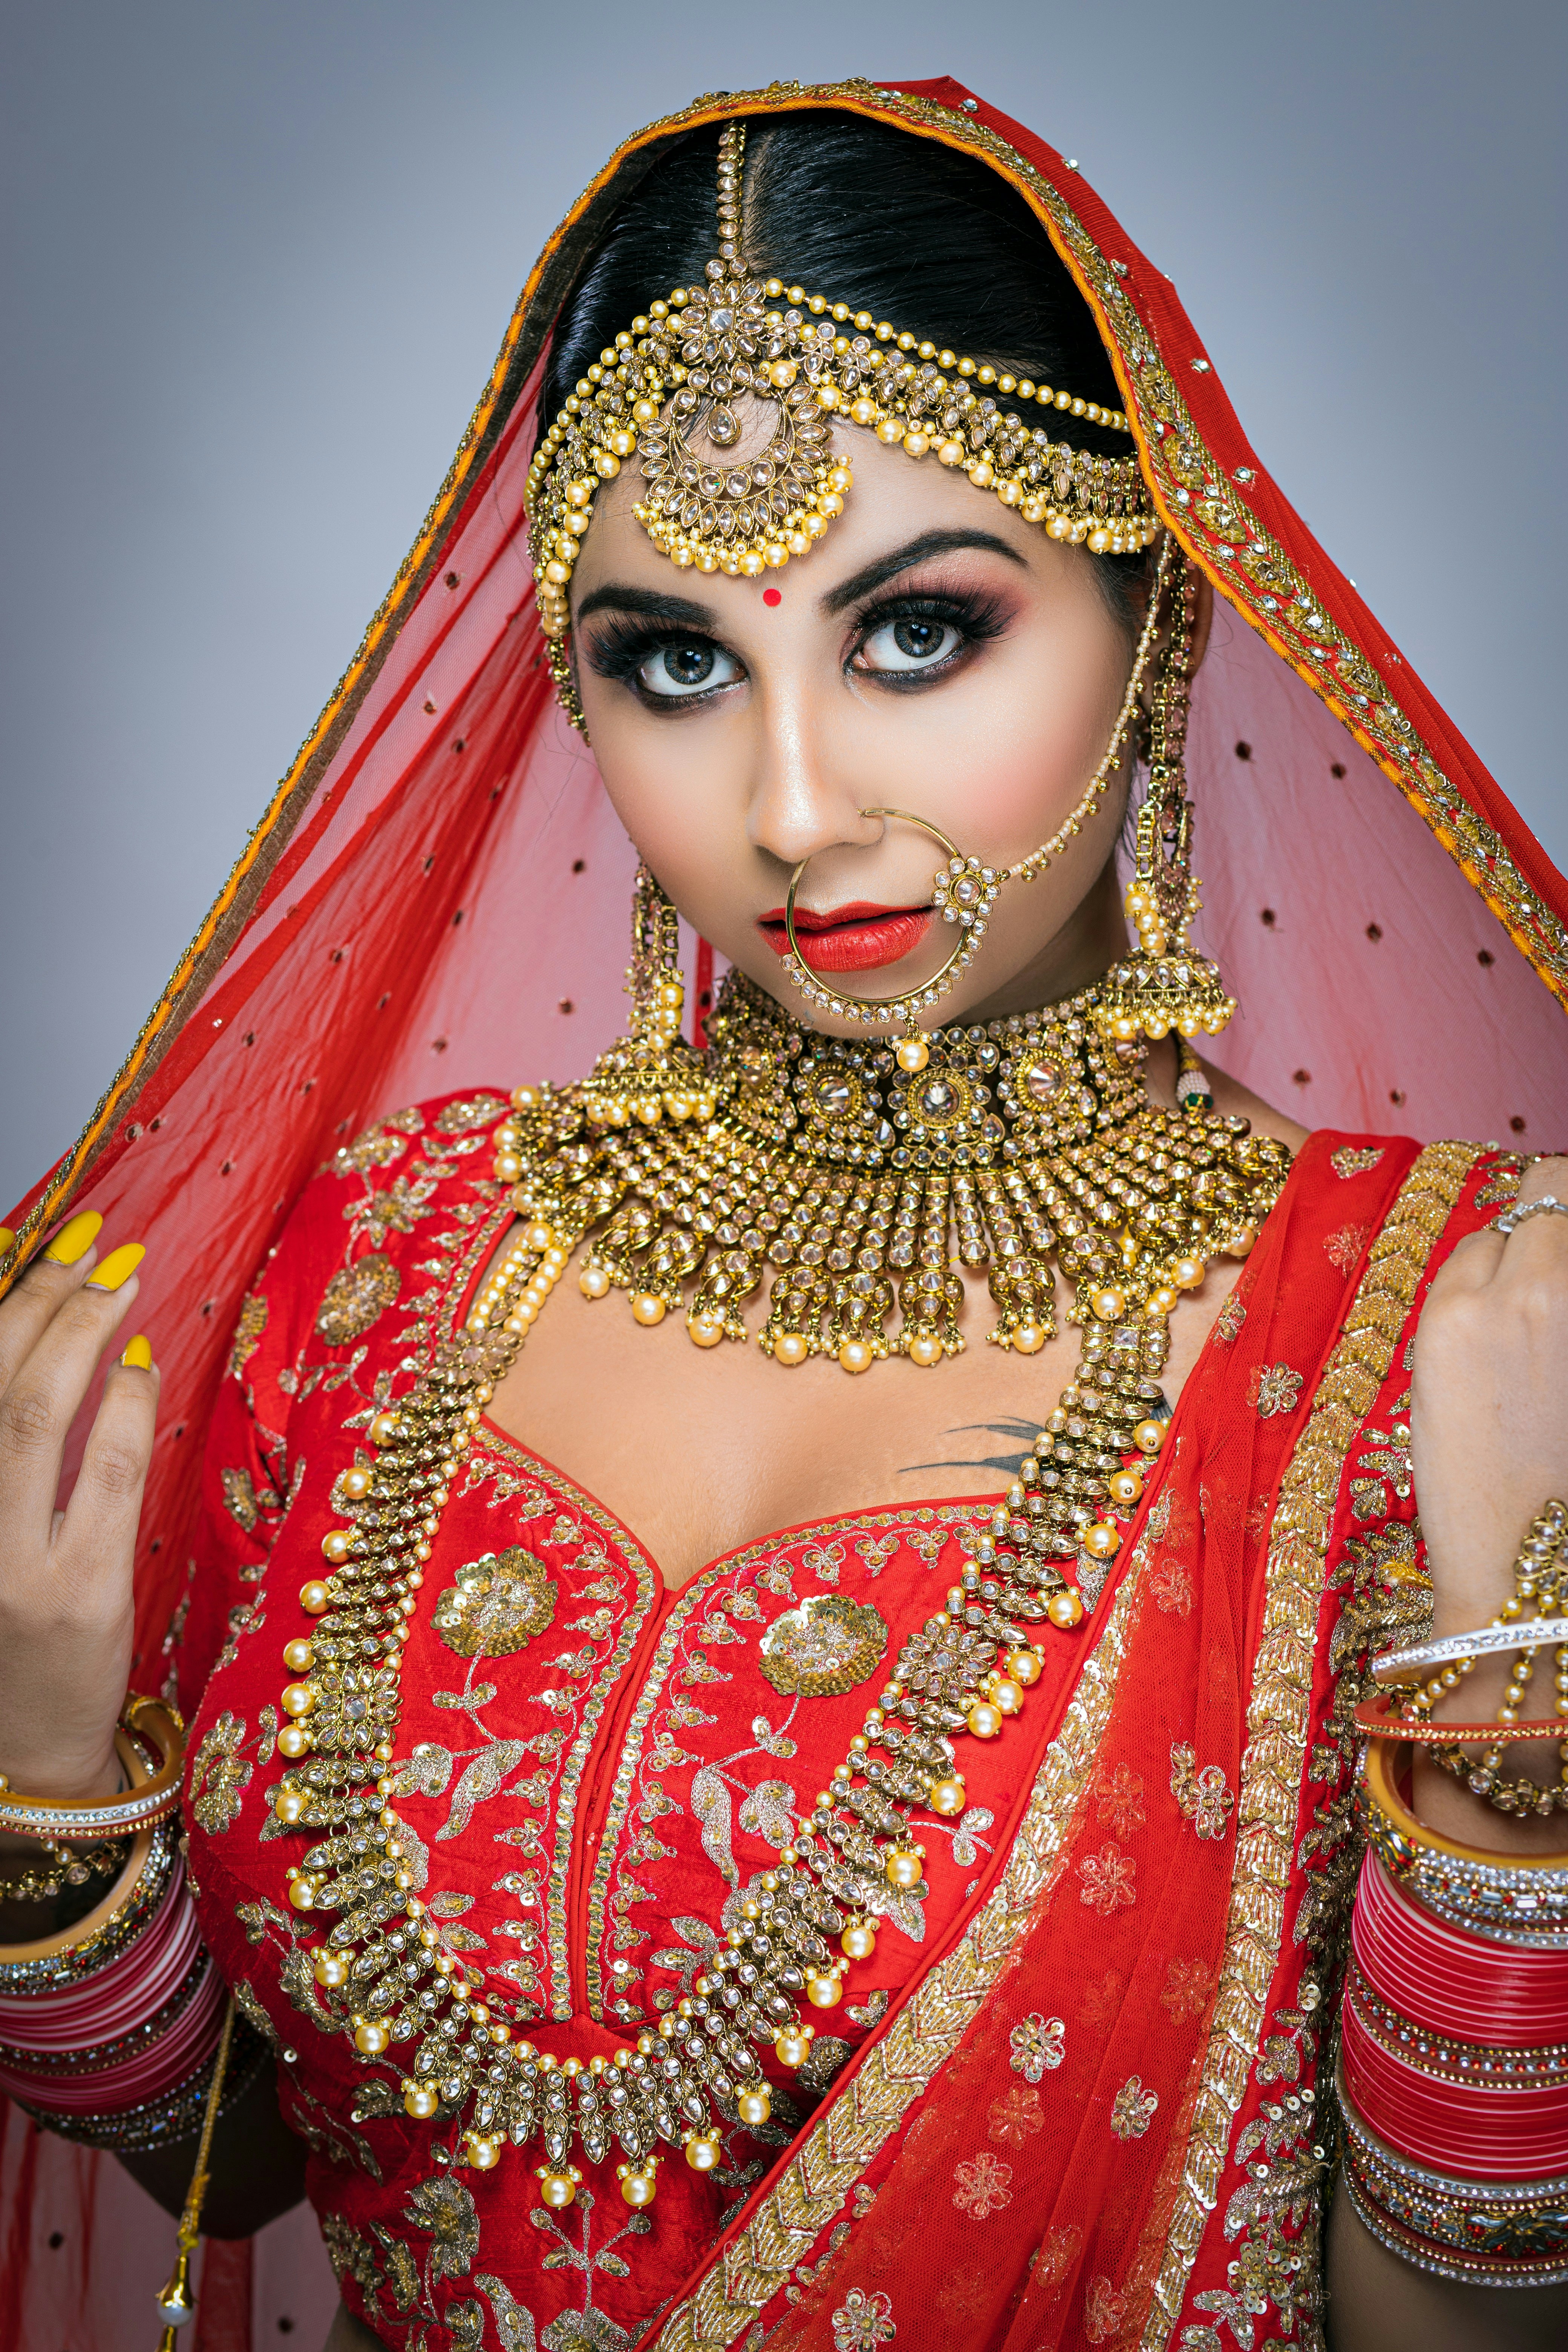 500+ Indian Bride Pictures Download picture